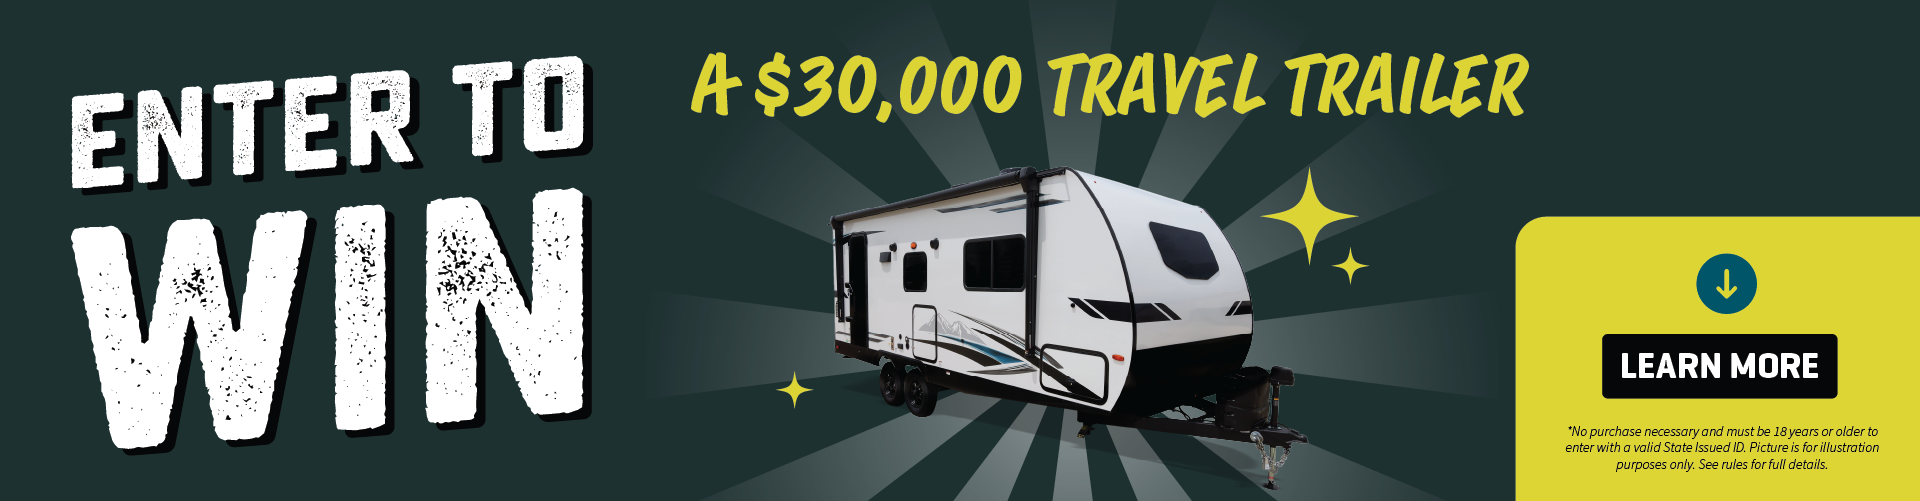 Enter to win a new $30,000 travel trailer